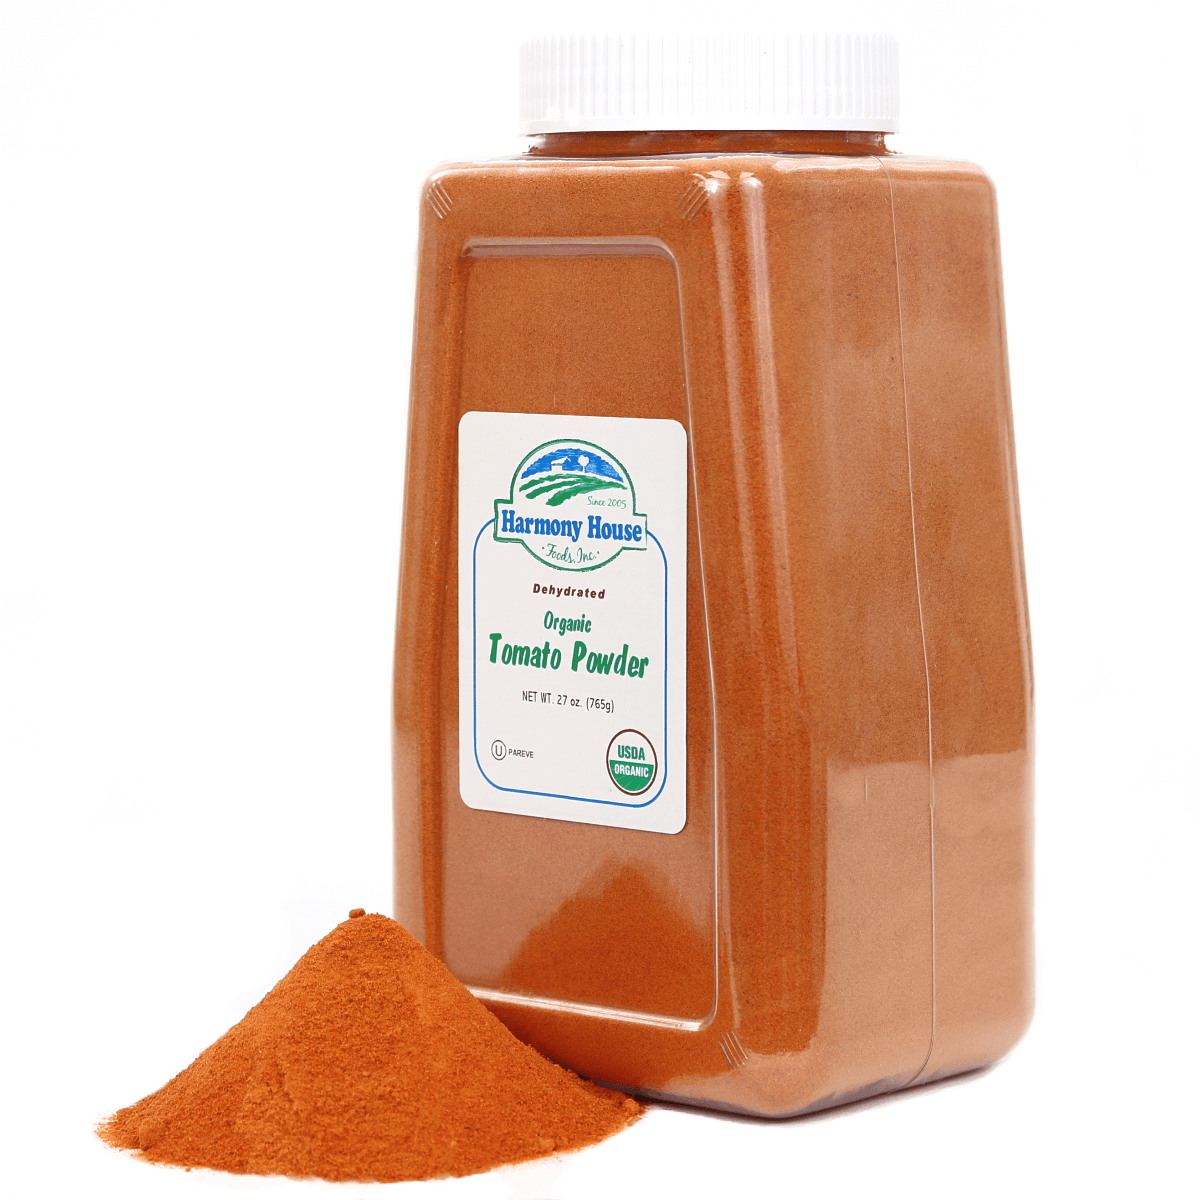 A Harmony House jar of red curry powder on a white background.